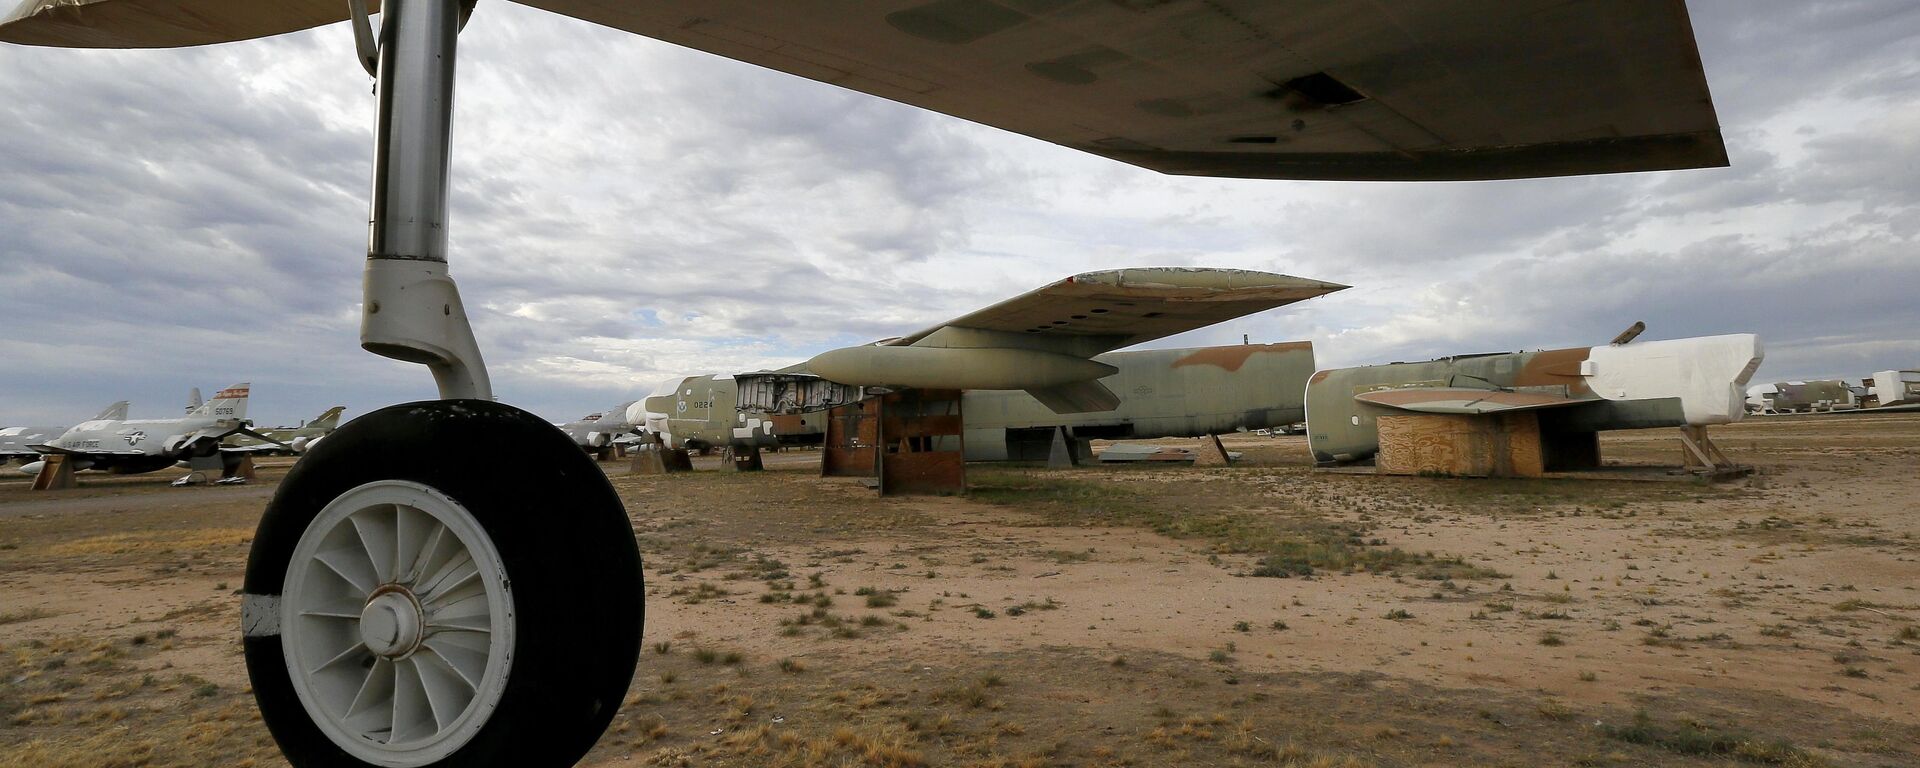 The 39th and final B-52G Stratofortress, tail number 58-0224, accountable under the New START Treaty (Strategic Arms Reduction Treaty) with Russia, is shown at the 309th Aerospace Maintenance and Regeneration Group boneyard Thursday, May 21, 2015 at Davis-Monthan Air Force Base in Tucson, Ariz. The United States cut the tails off 39 B-52G's in order to remove them from treaty accountability, as they still count as nuclear-capable delivery platforms with their tails attached. The tails are angled at 30 degrees so Russian satellites can view compliance. Tail number 58-0224, nicknamed Sweet Tracy, flew combat missions over North Vietnam in Operation Linebacker II, which began Dec. 18, 1972 and lasted 11 nights. This particular B-52G, 58-0224, targeted the Yen Vien Railroad Yards and the Hanoi Railroad Repair Yards. At the time, bomber was stationed in Guam.  - Sputnik International, 1920, 25.08.2022